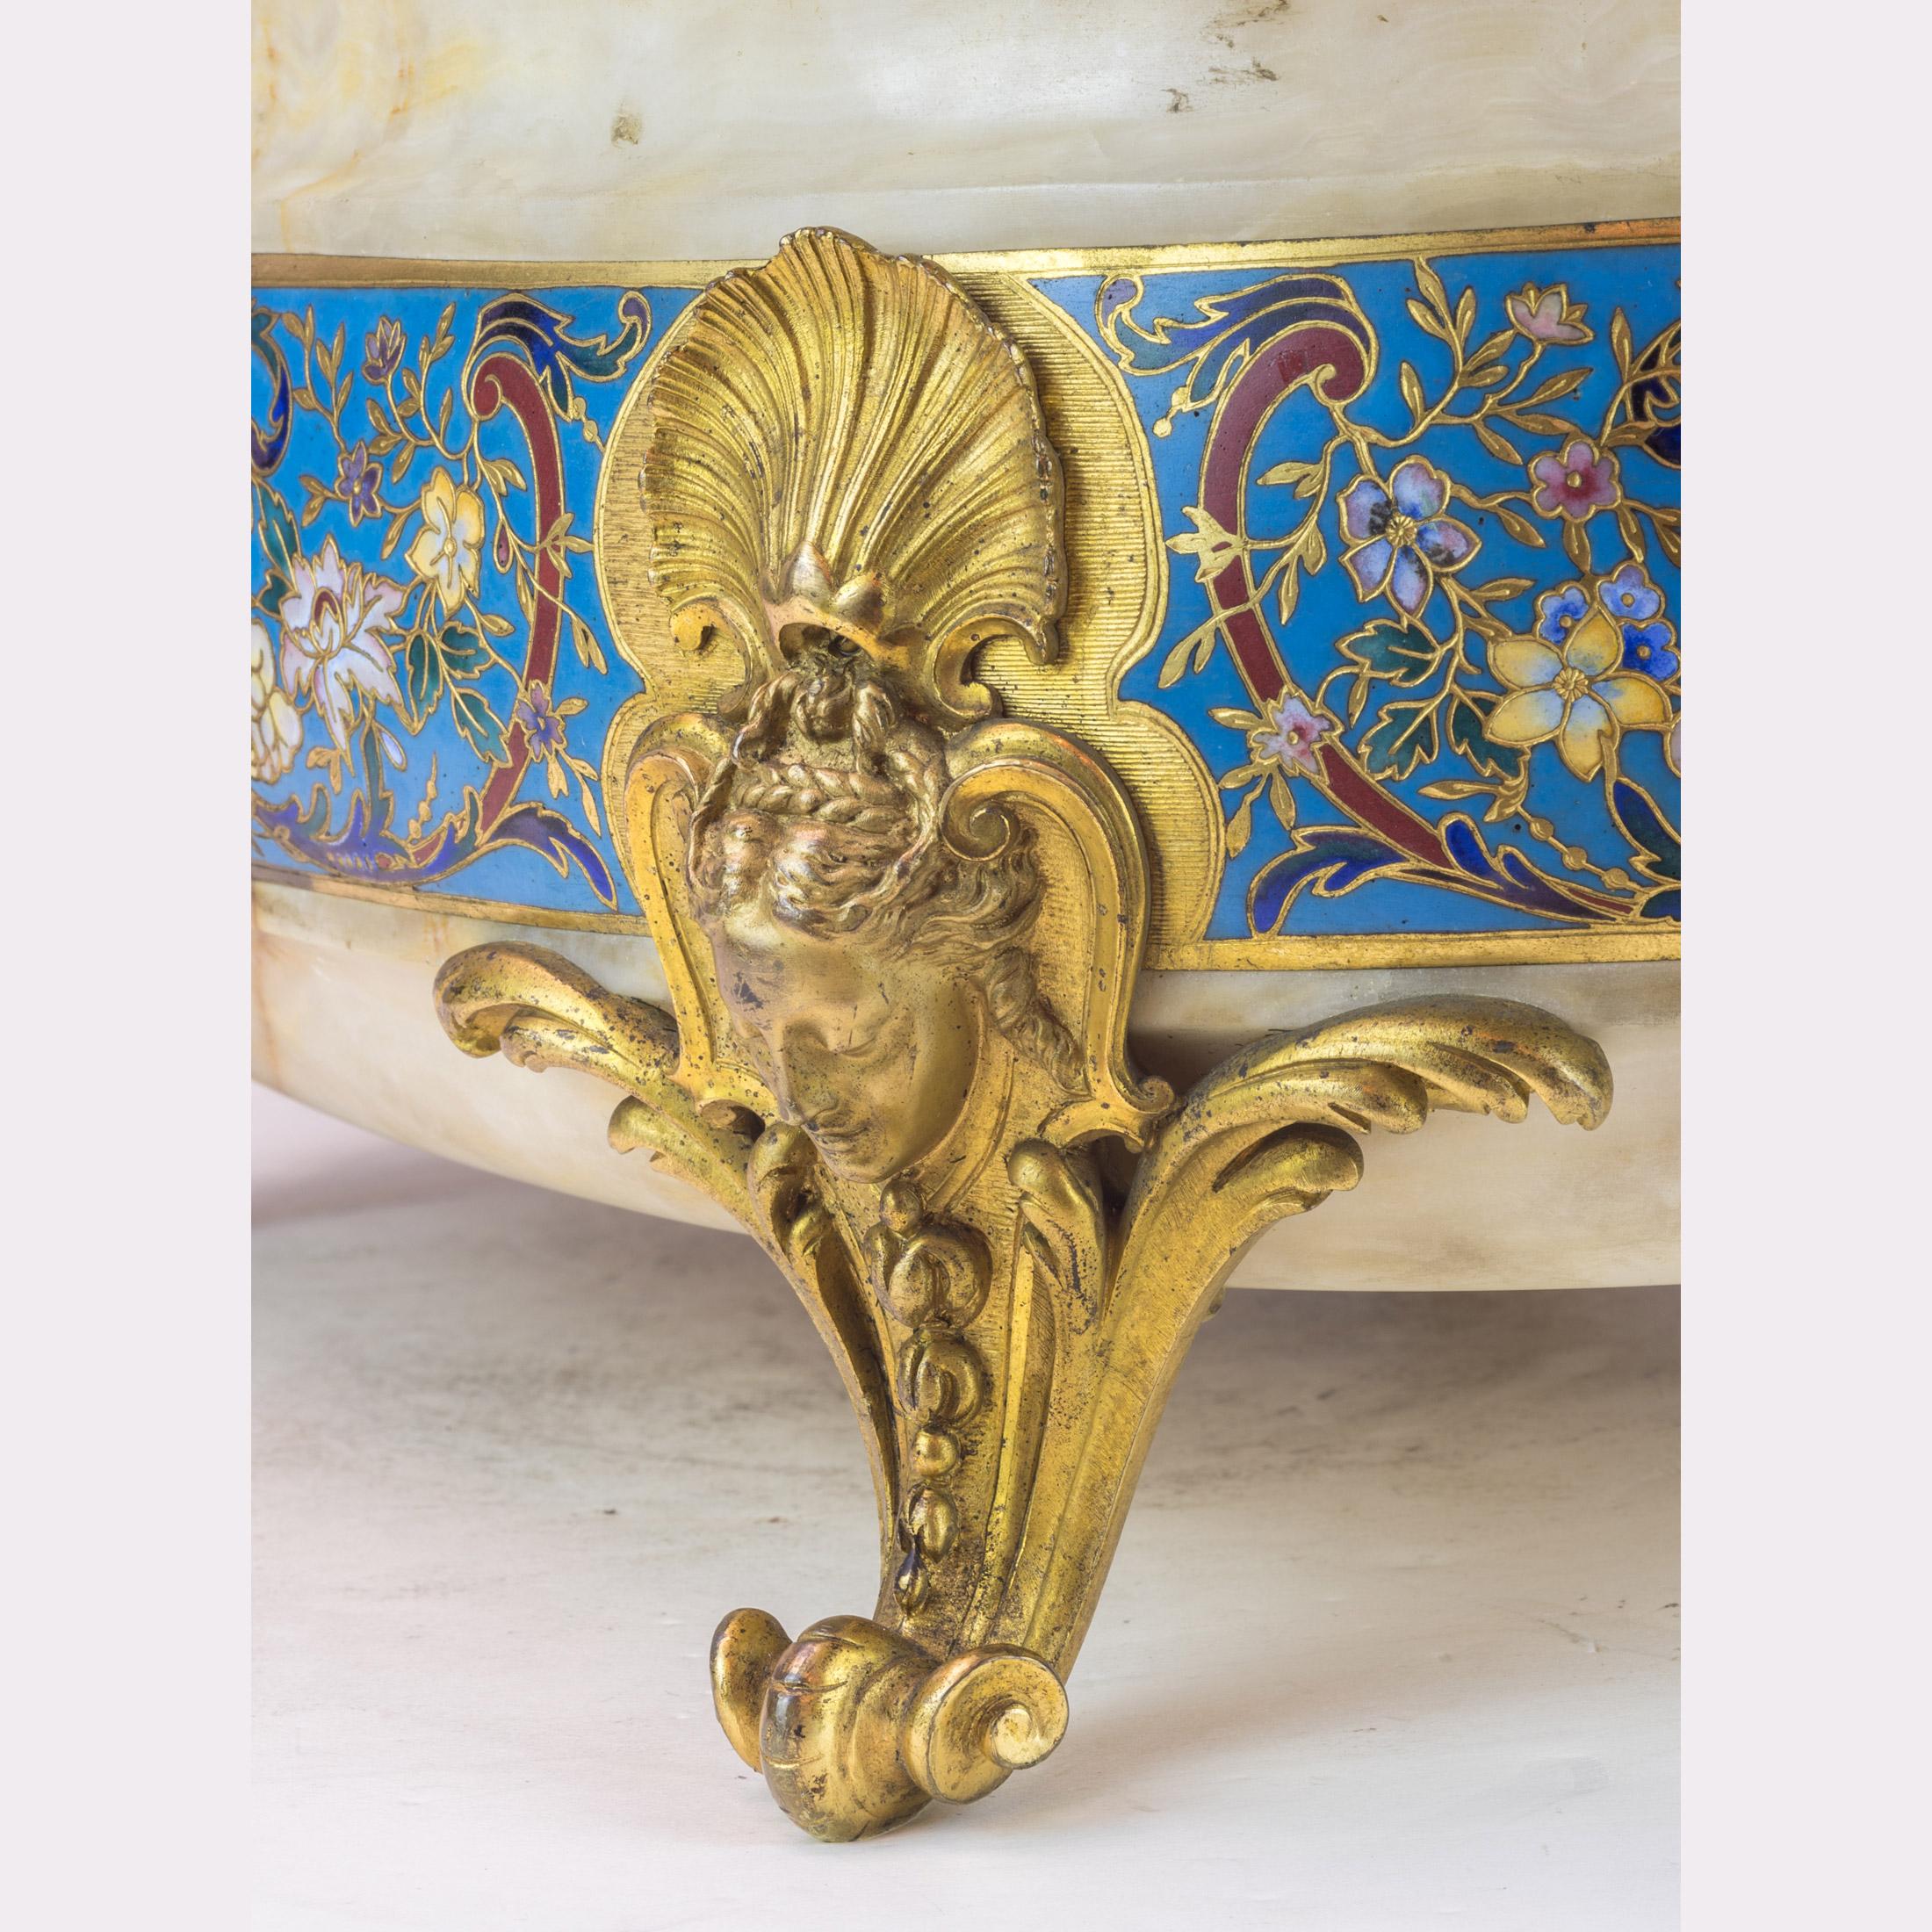 19th Century Ormolu-Mounted and Champlevé Enamel Decorated Onyx Jardinière by Barbedienne For Sale